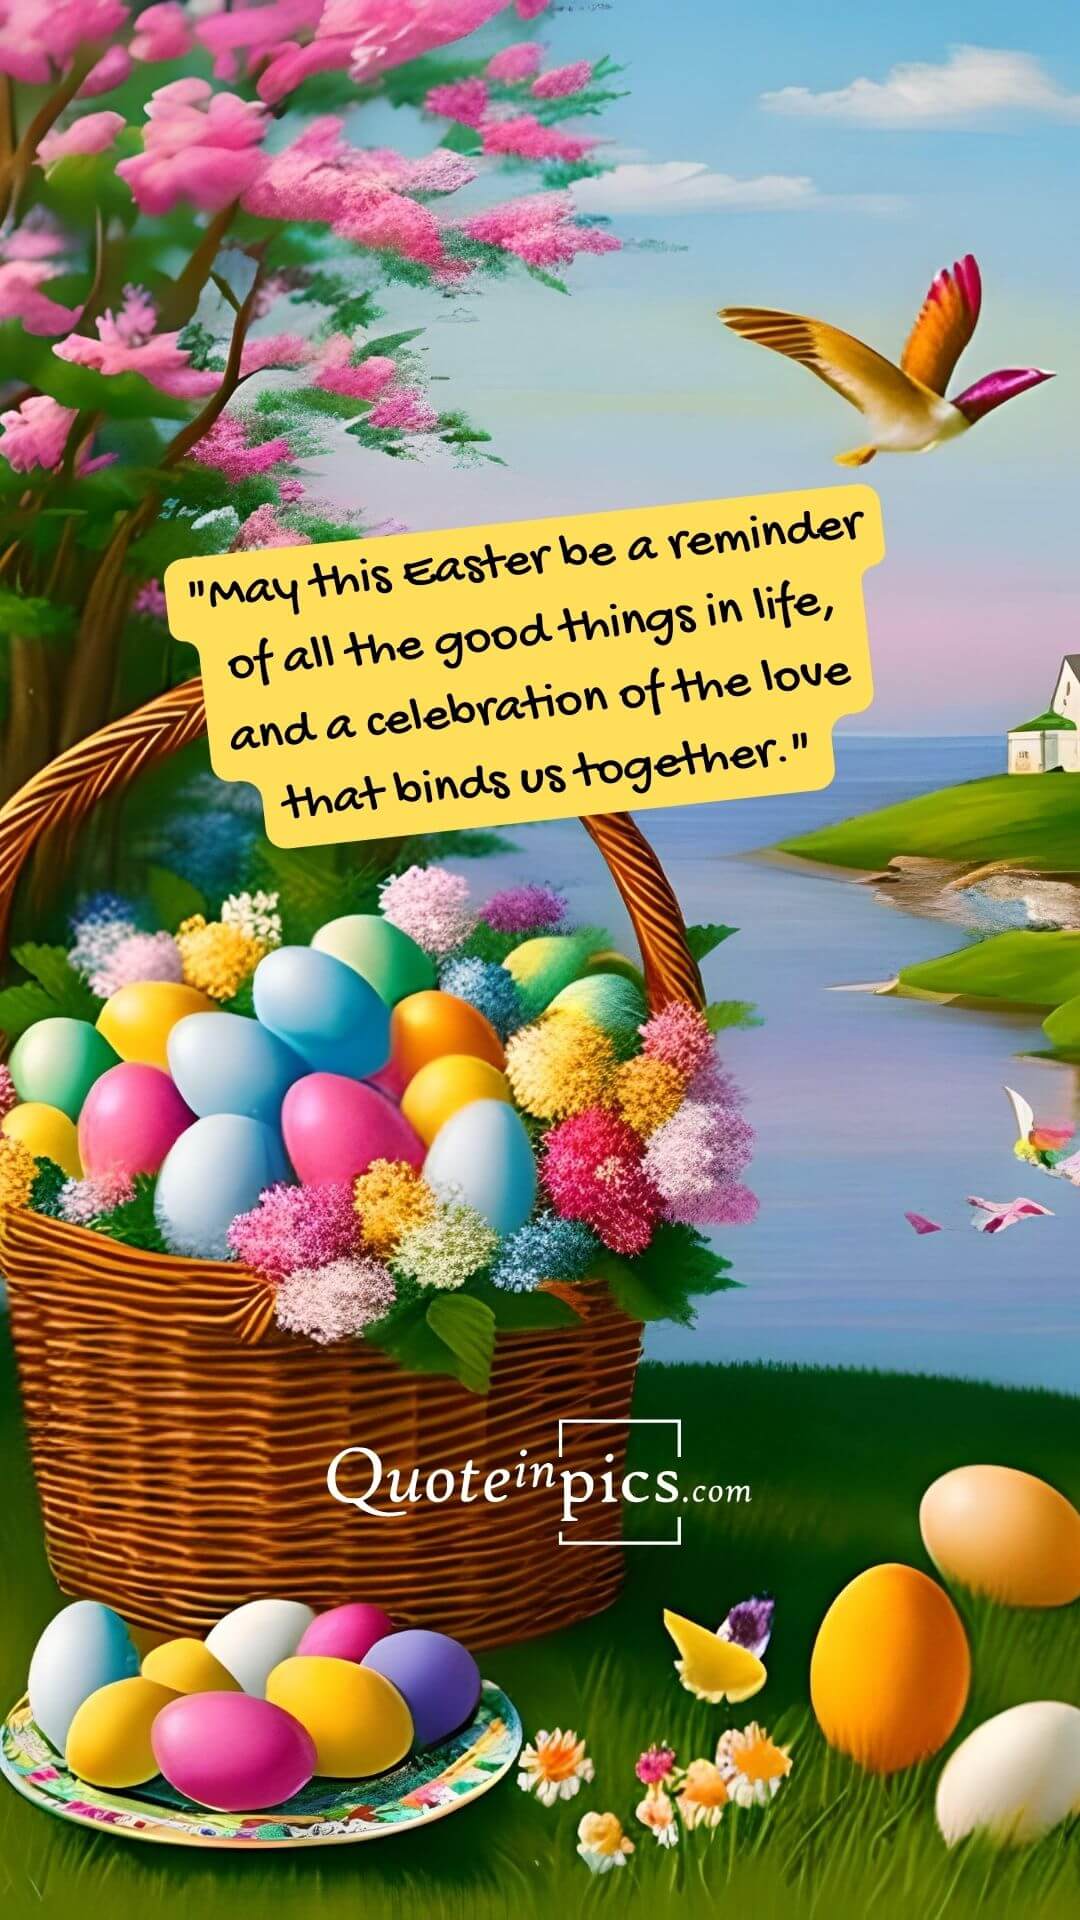 May this Easter be a reminder of all the good things in life